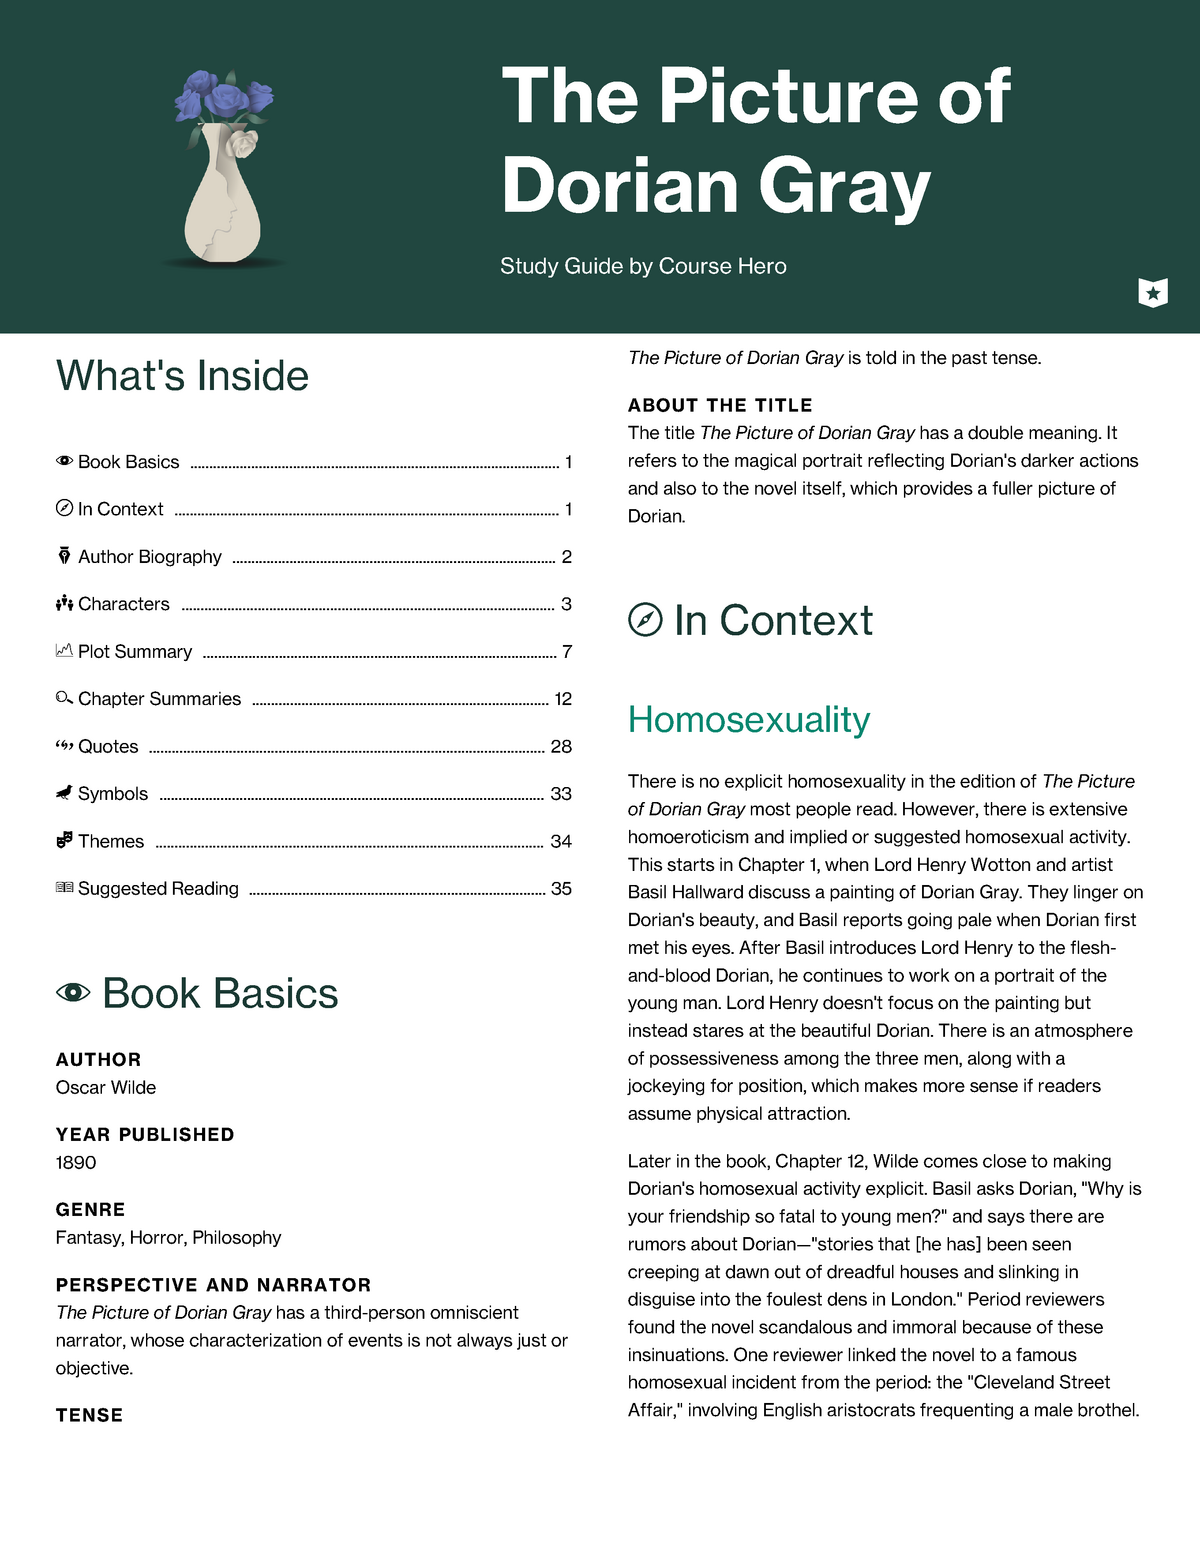 dorian gray essay questions and answers pdf